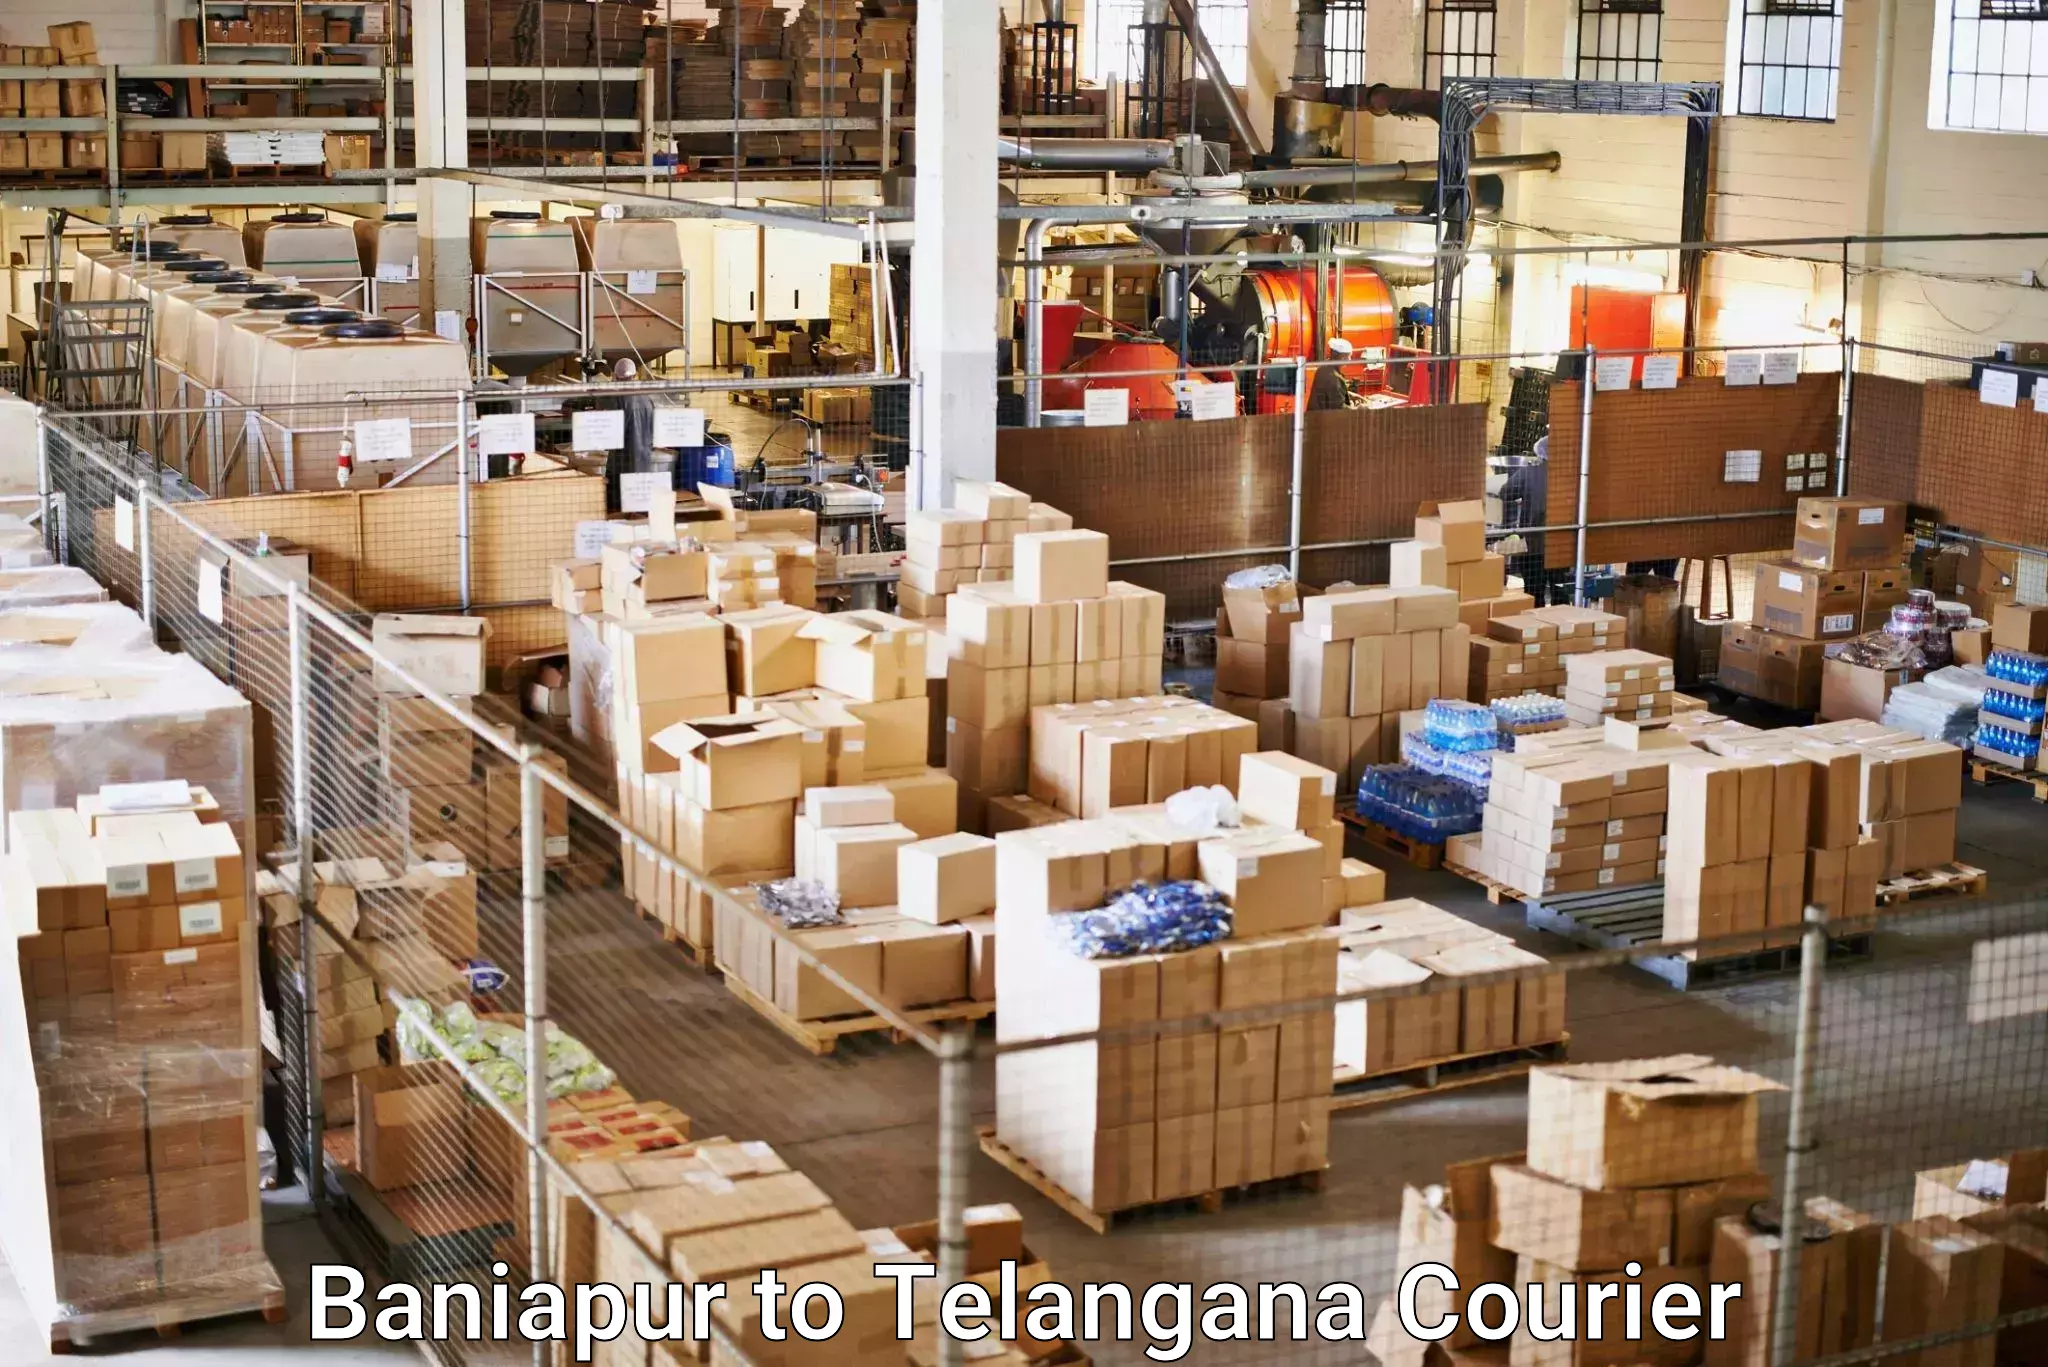 State-of-the-art courier technology Baniapur to Trimulgherry